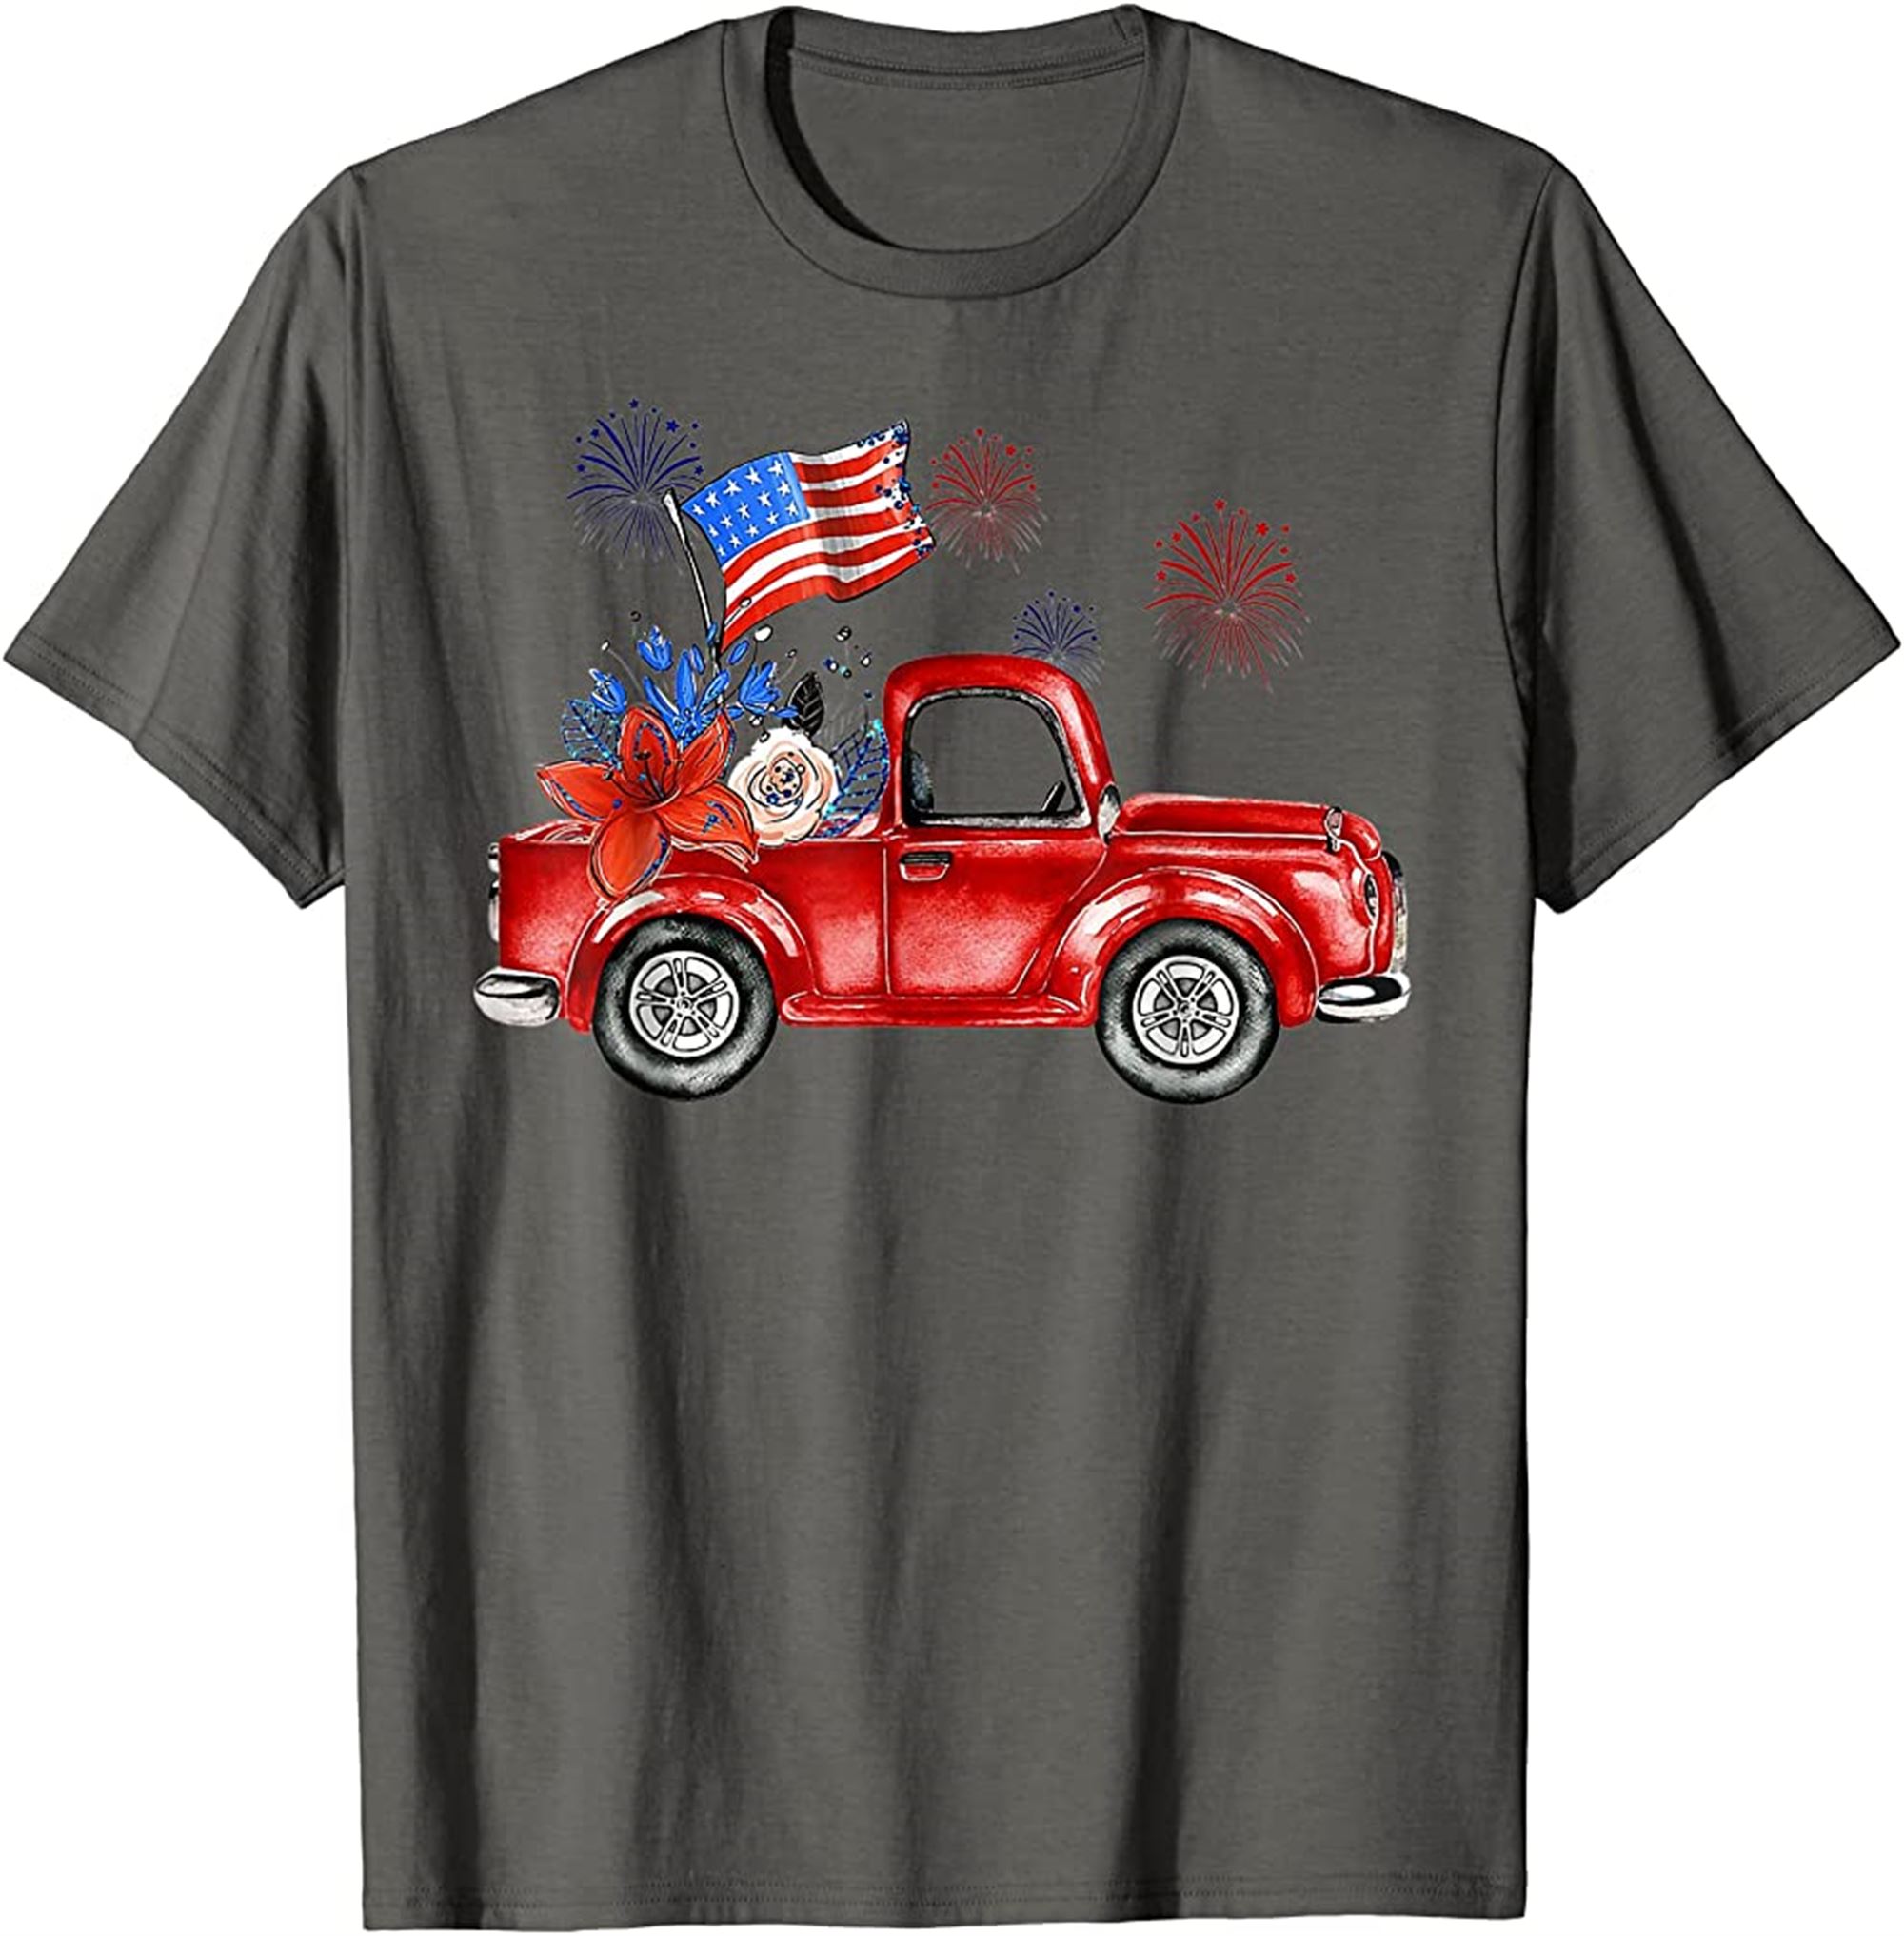 4th Of July T-shirt Size Up To 5xl